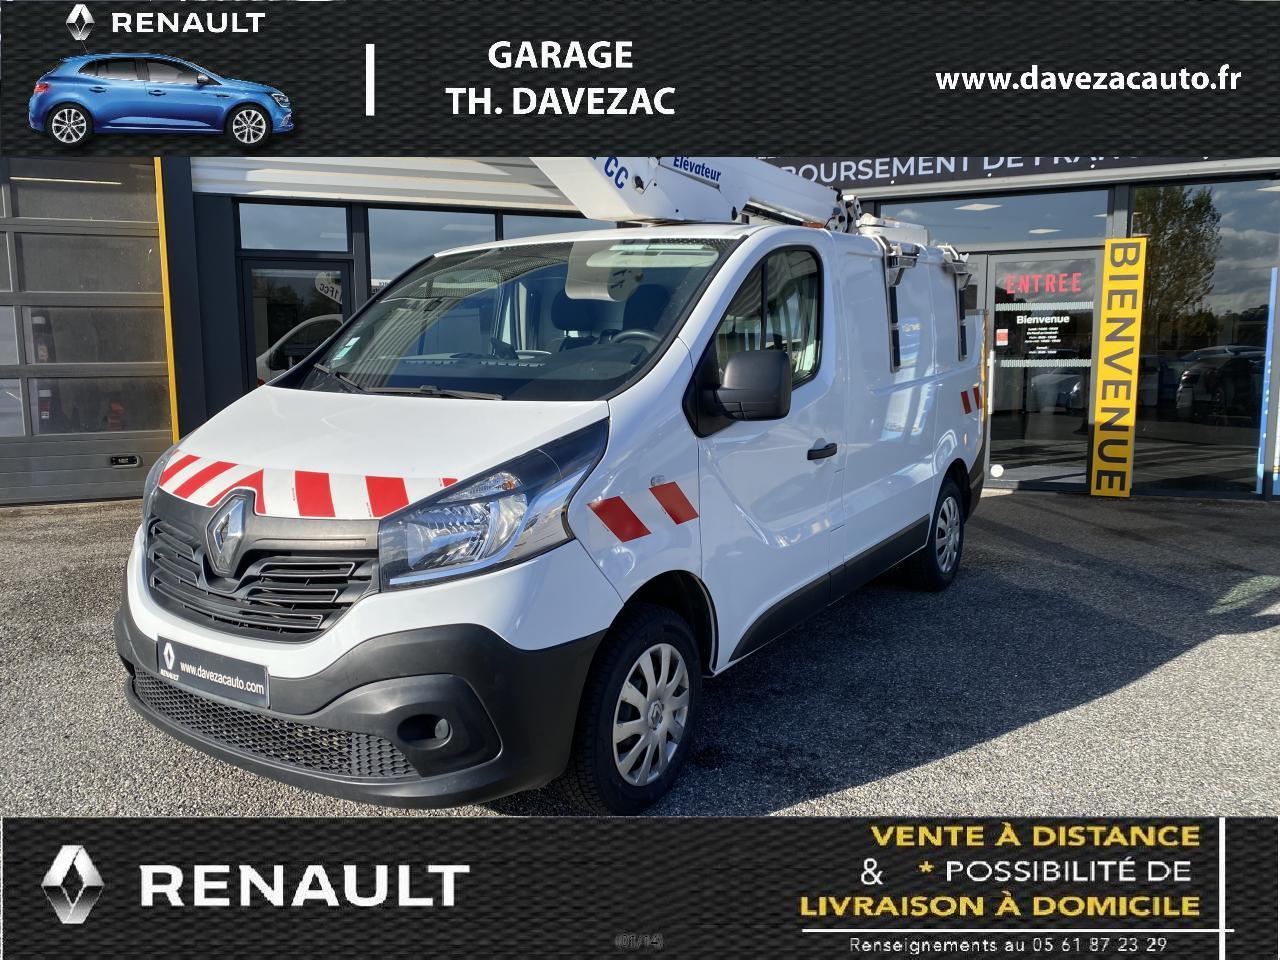 Garage Thierry Davezac - RENAULT-TRAFIC-Trafic L2H1 2.0 dCi - 120 III  FOURGON Grand Confort L2H1 PHASE 2